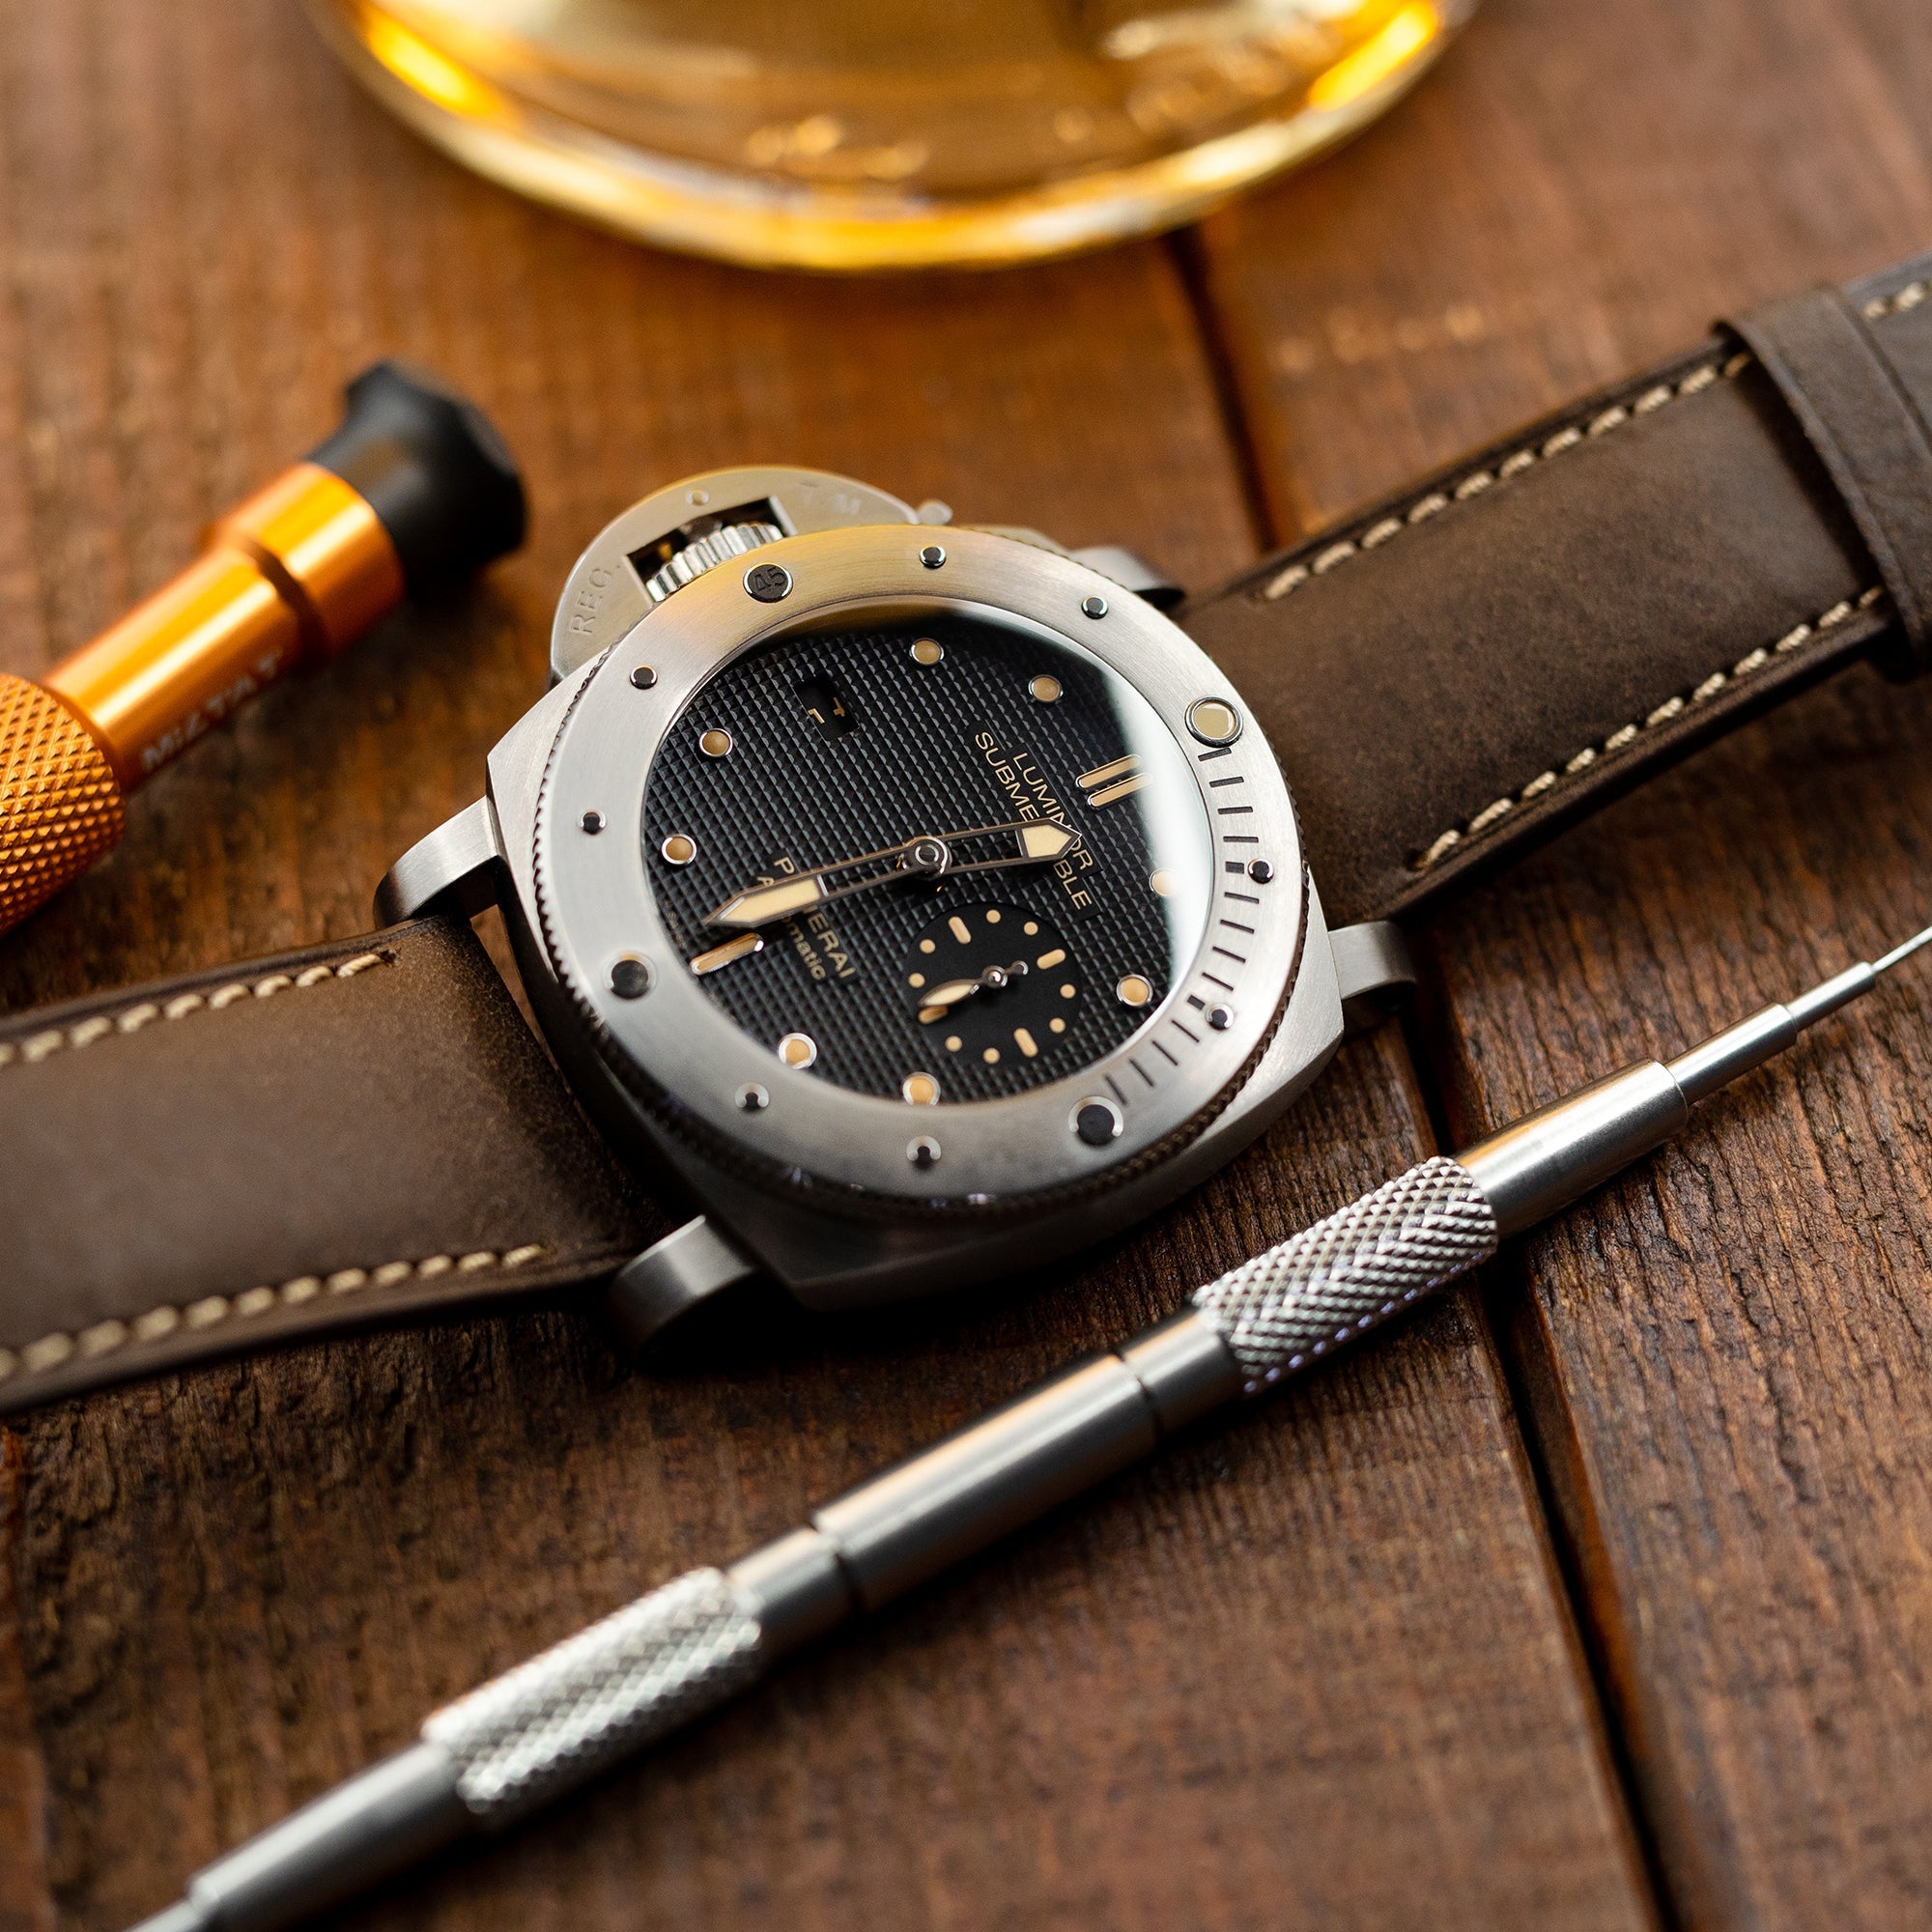 Panerai Luminor Submersible 1950 Left-Handed 3 Days Automatic PAM569 Strapcode watch bands